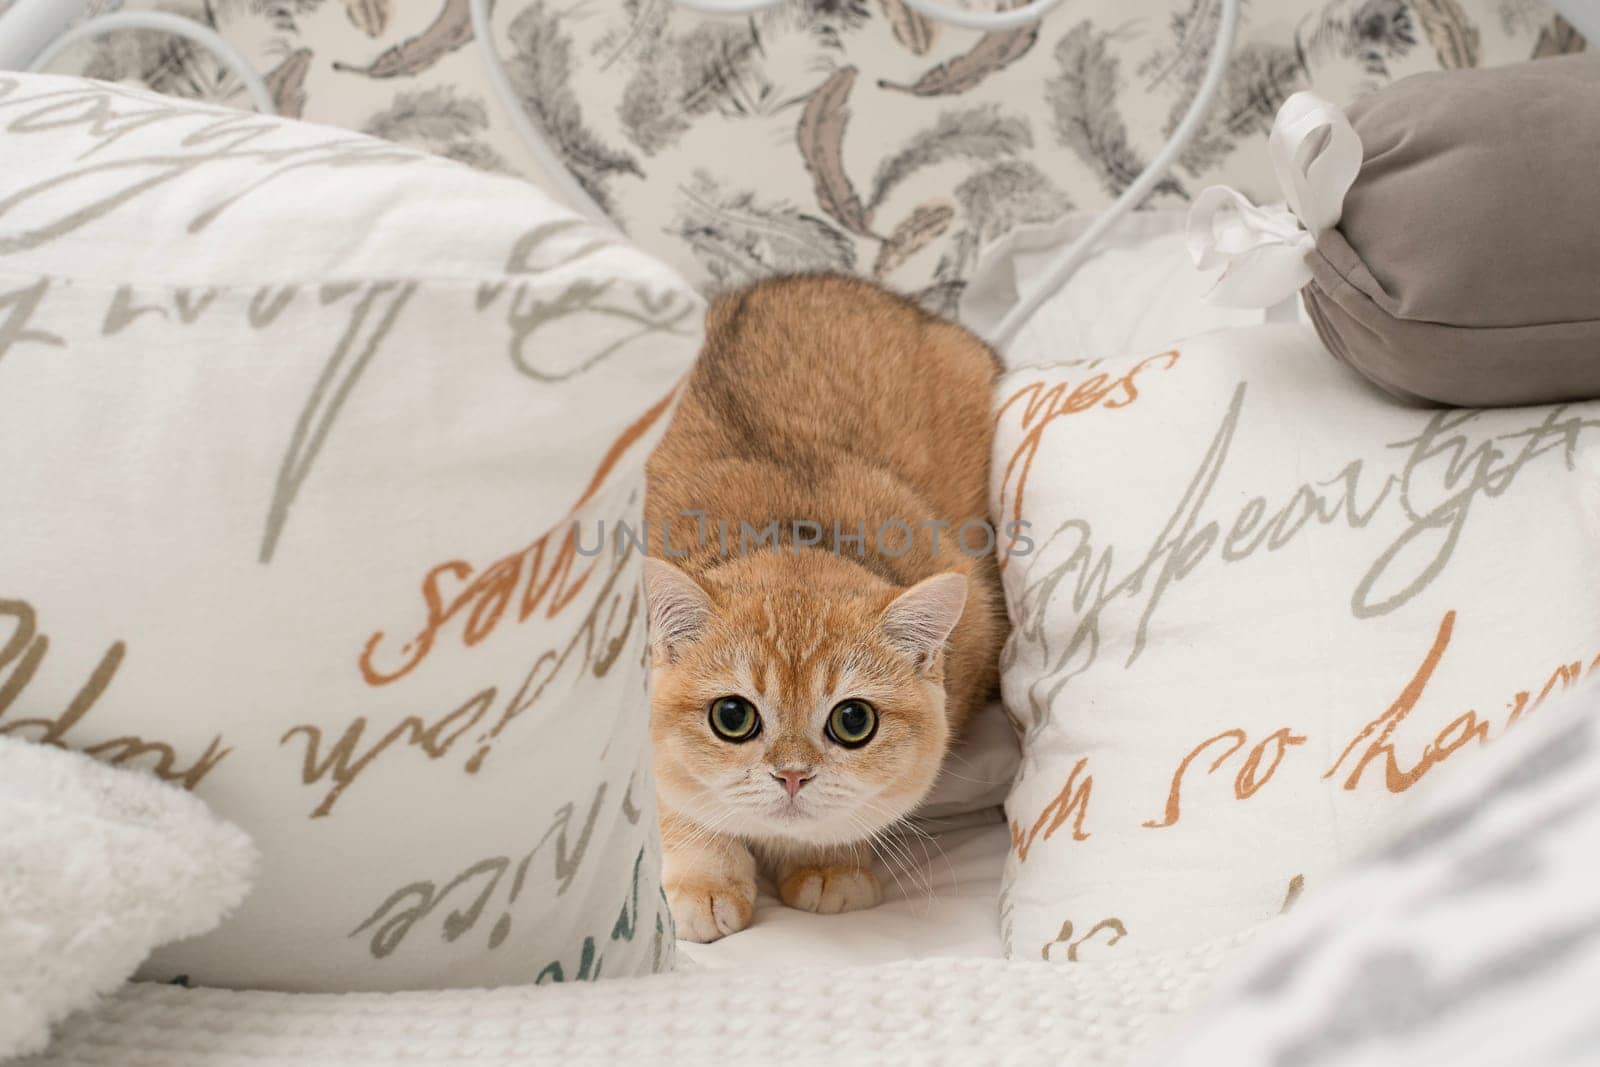 Pets. A beautiful red kitten, Scottish Fold breed, sits on a bed in the middle of white pillows and looks fearfully at the camera with big eyes. Concept. Close-up